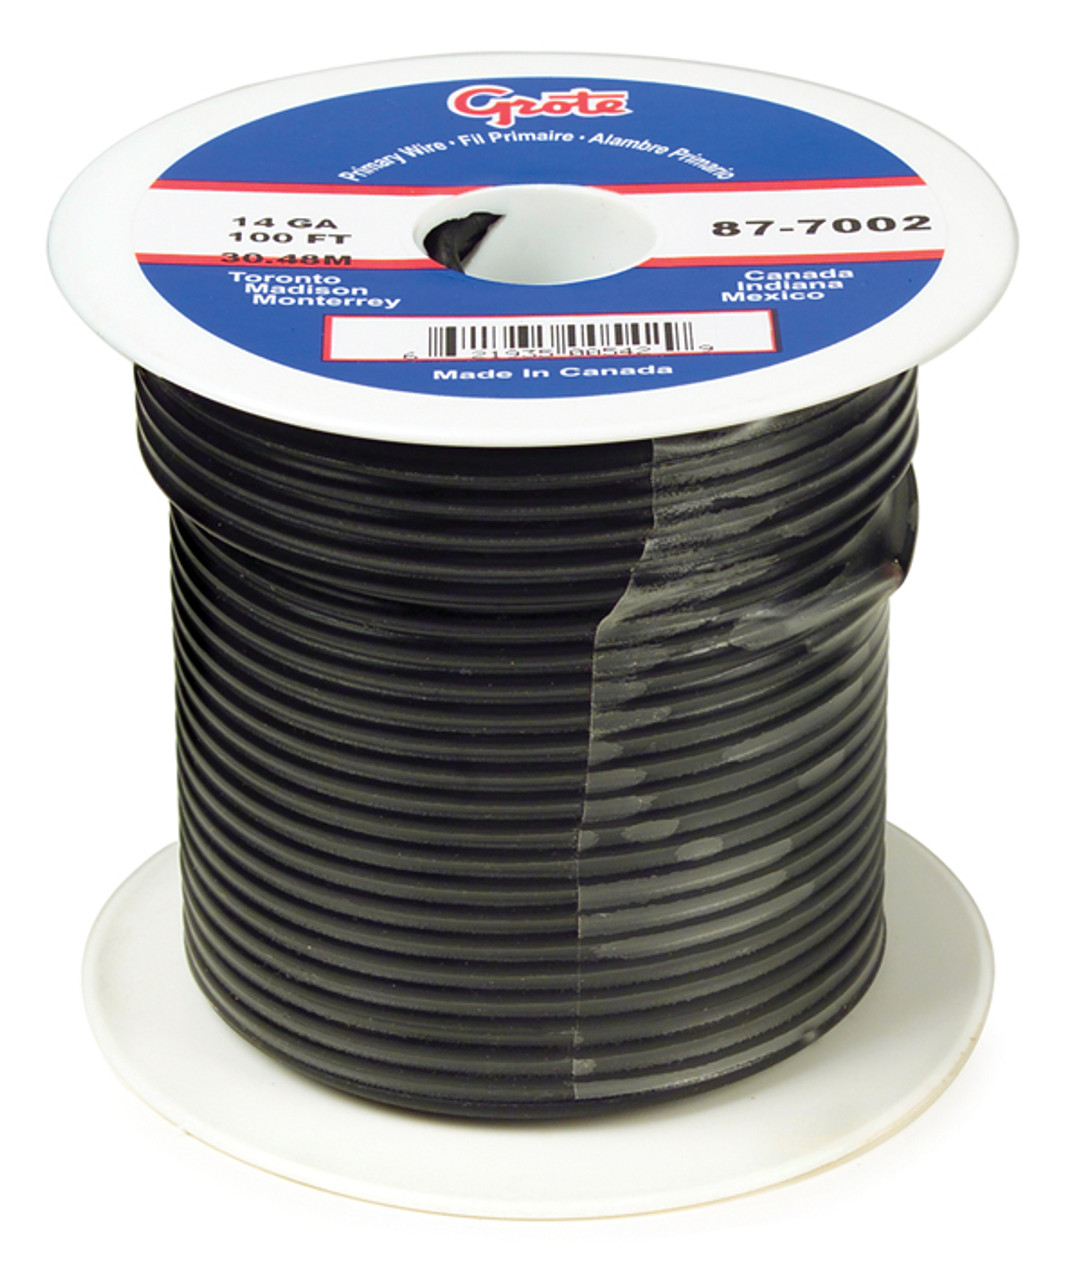 12 AWG General Purpose Thermo Plastic Wire @ 100' - Black  87-6002